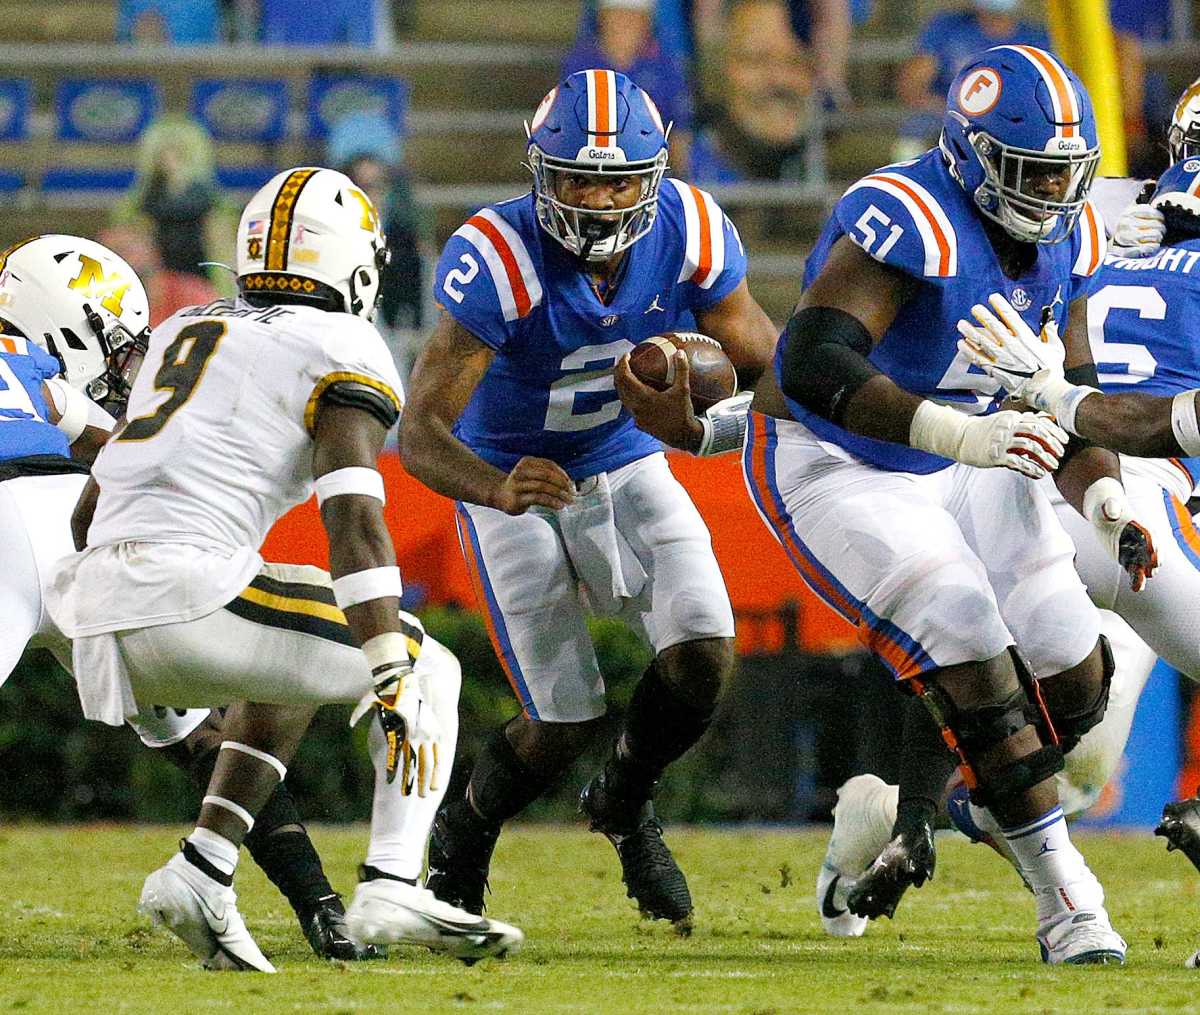 Oct 31, 2020; Gainesville, FL, USA; Florida quarterback Anthony Richardson (2) runs with the ball during a game against the Missouri Tigers at Ben Hill Griffin Stadium in Gainesville, Fla. Oct. 31, 2020. Mandatory Credit: Brad McClenny-USA TODAY NETWORK